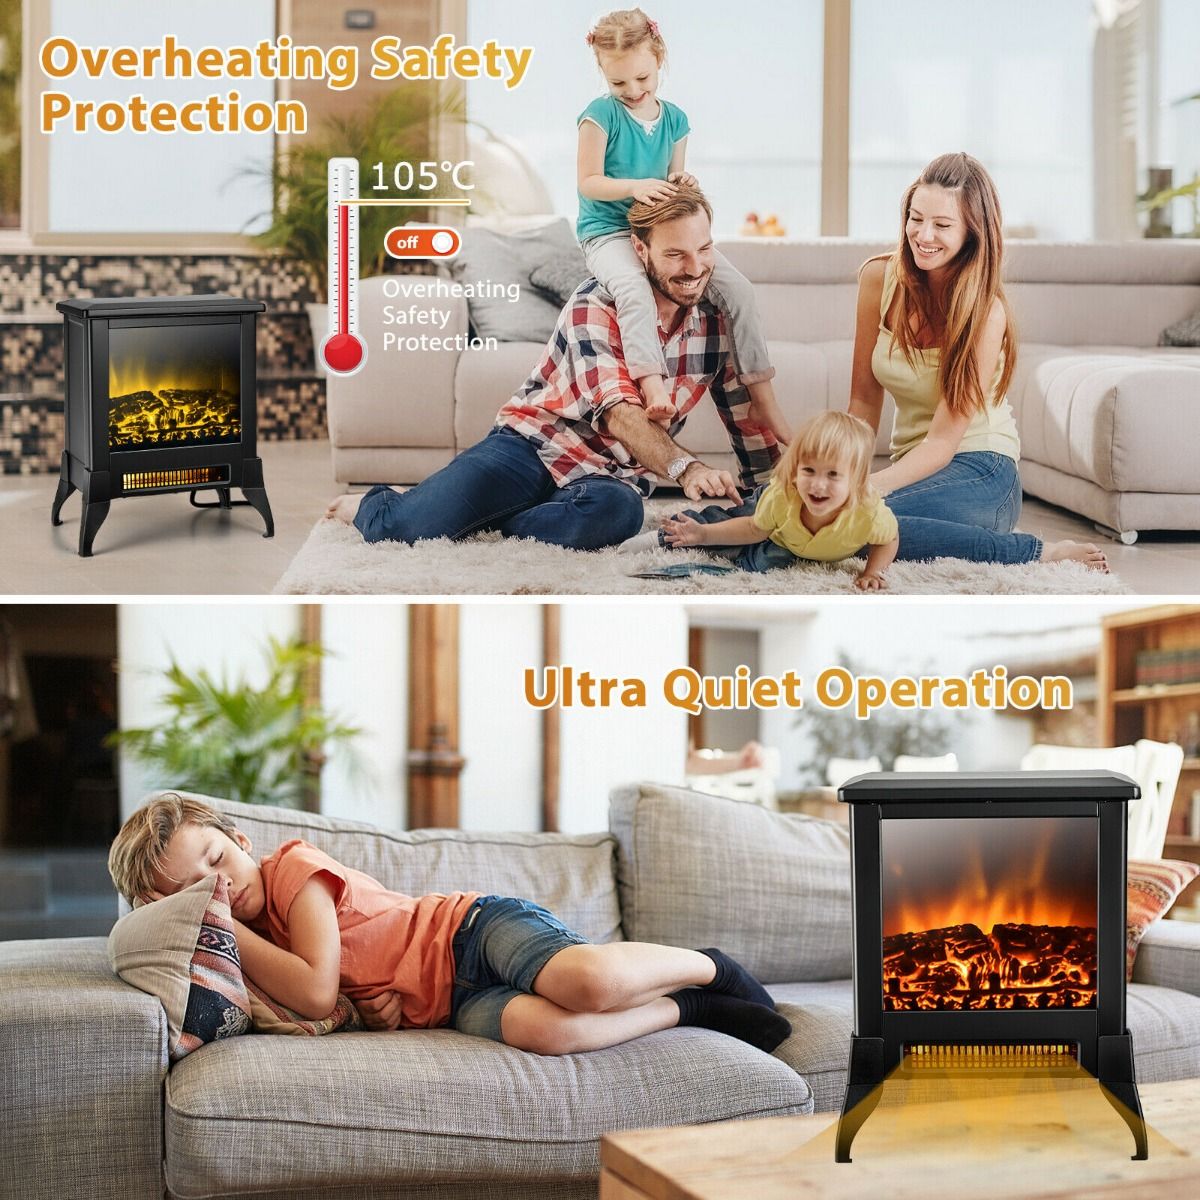 2000W Electric Freestanding Fireplace Stove Heater with Adjustable Thermostat